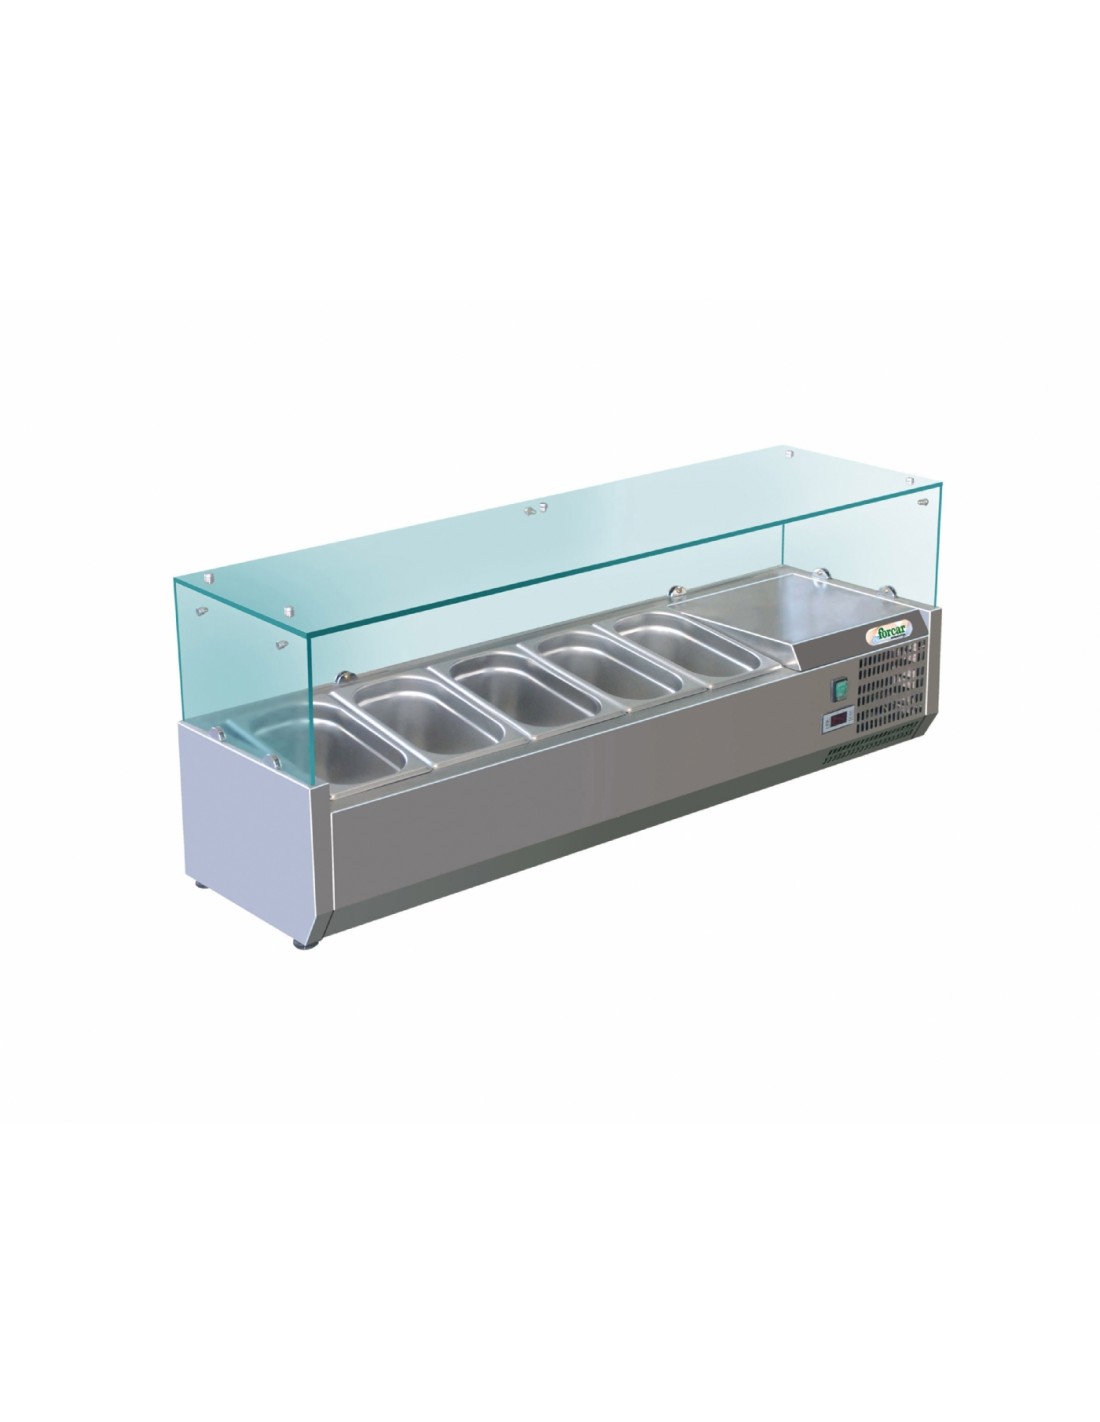 Refrigerated display case brings ingredients - Static - Capacity 4 GN 1/3 + 1 GN 1/2 - cm 140 x 38 x 44.5h